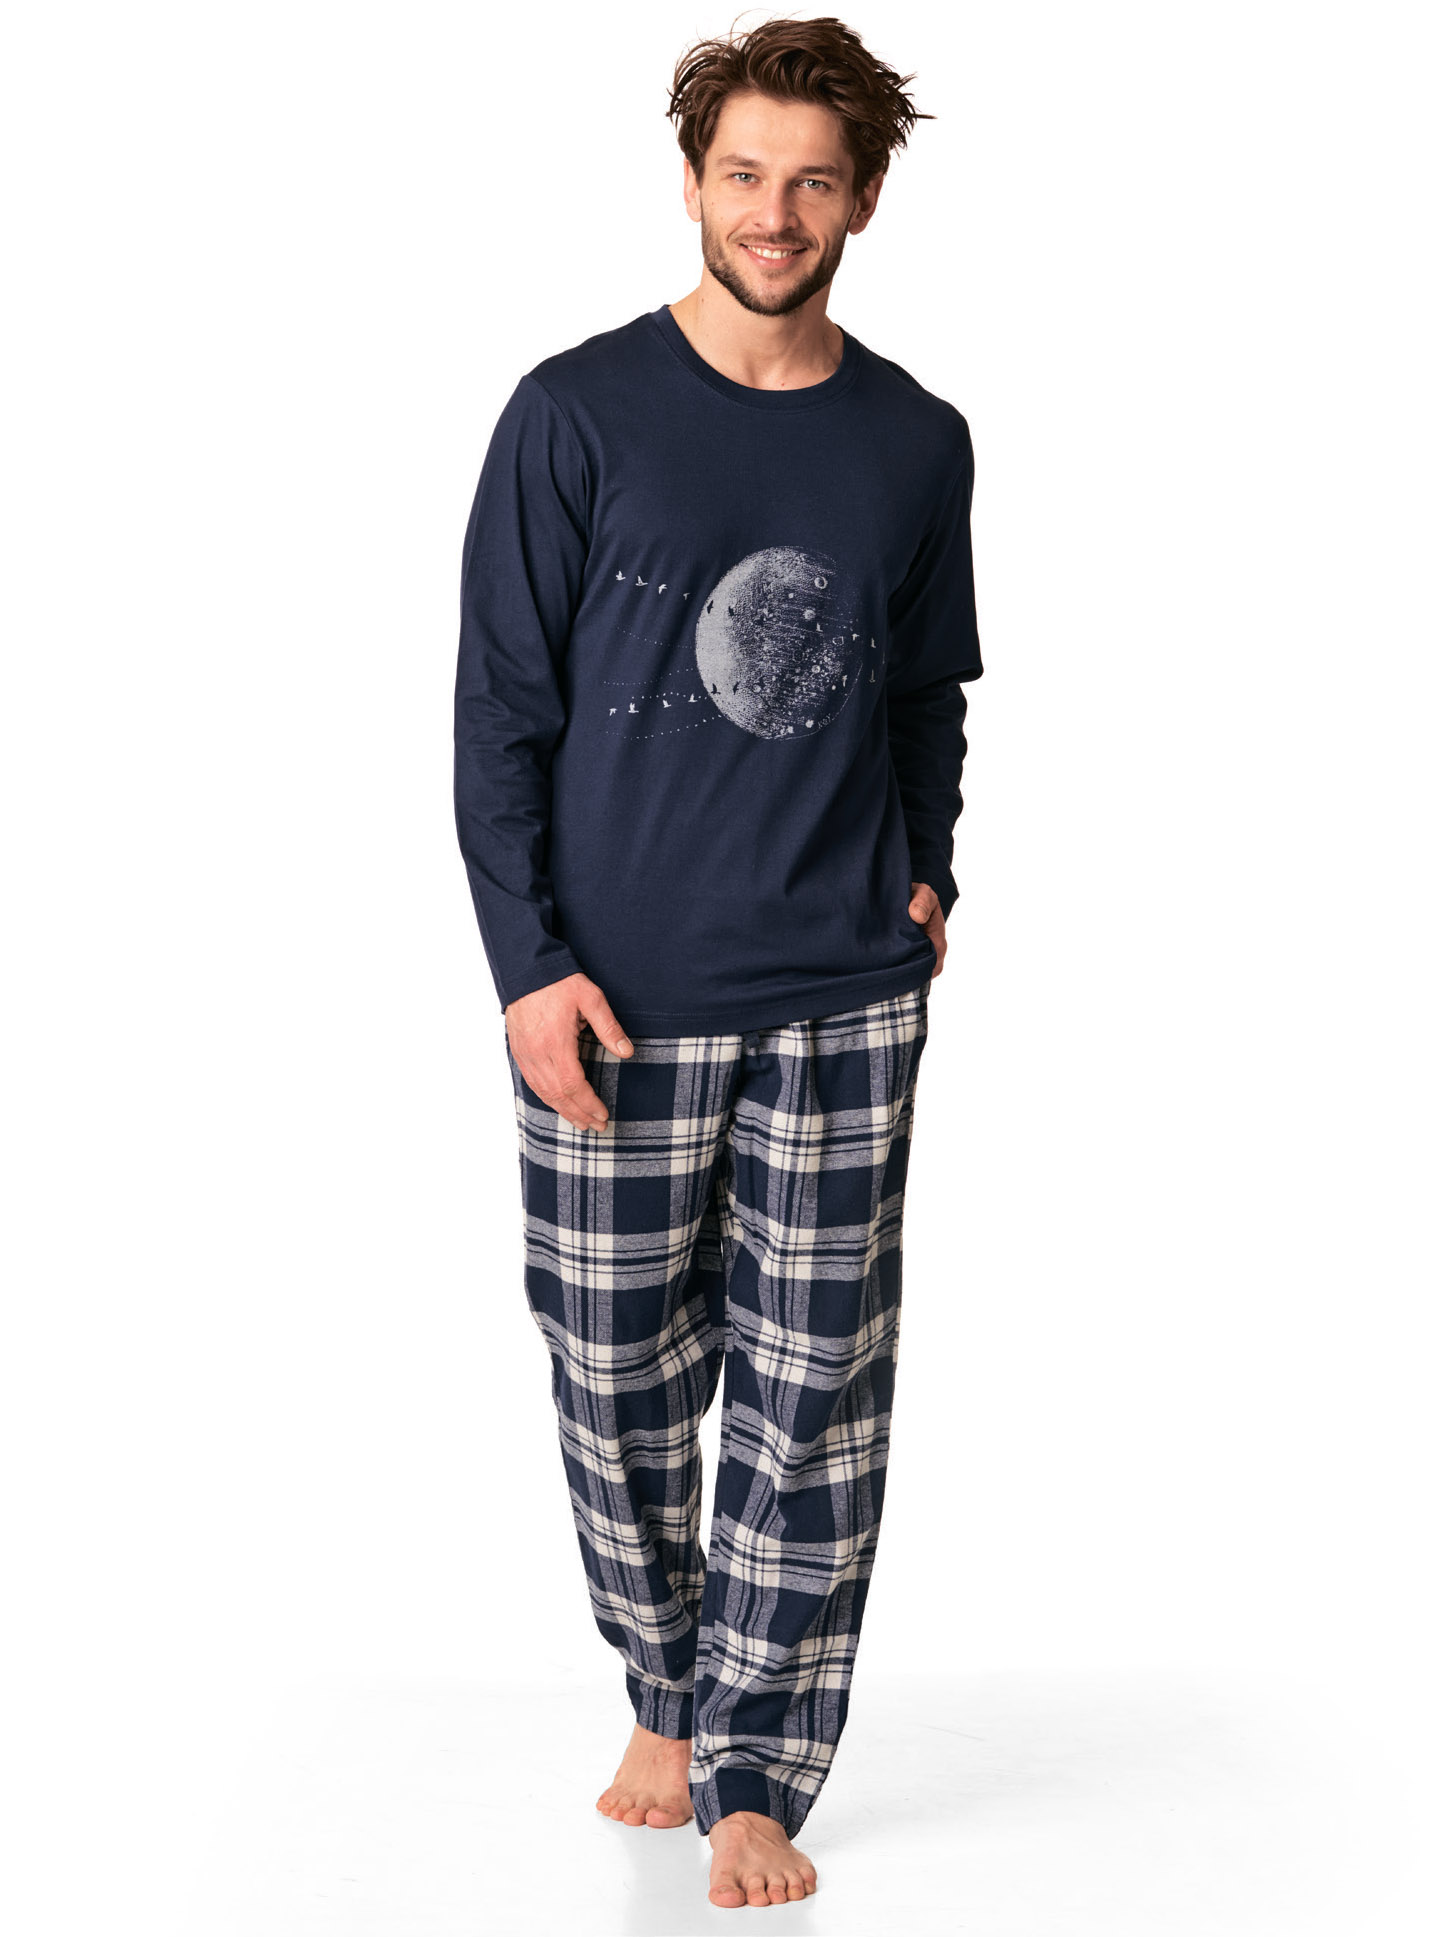 Men's cotton pajamas / home set with jersey top and flannel pants Key MNS 863 B22 3XL-4XL #1